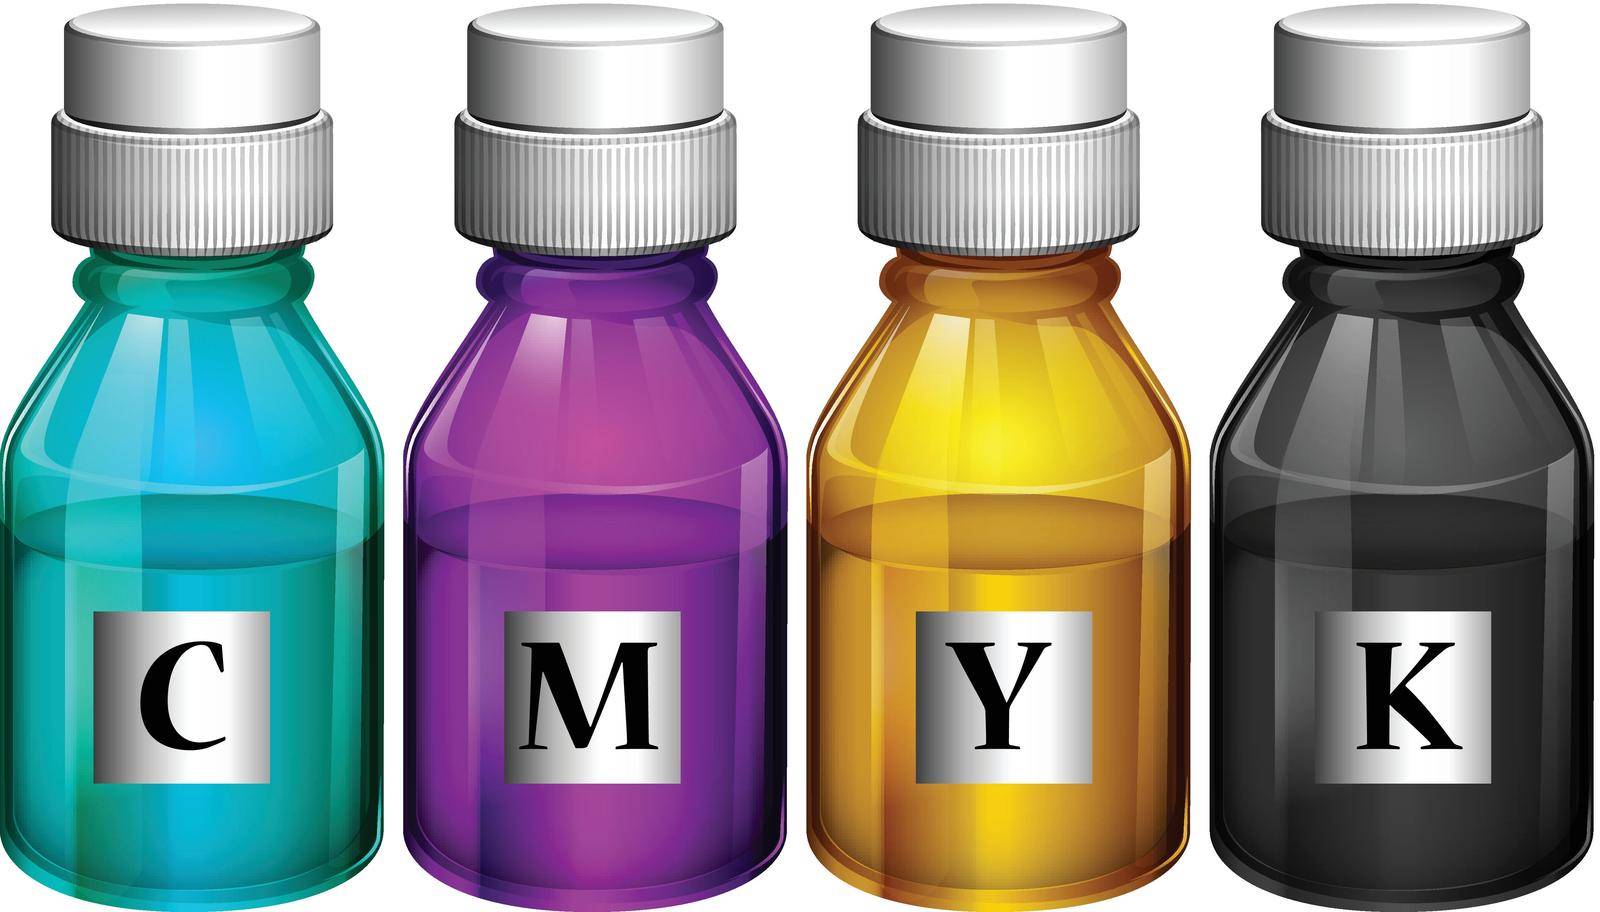 Illustration of the bottles of colorful inks on a white background